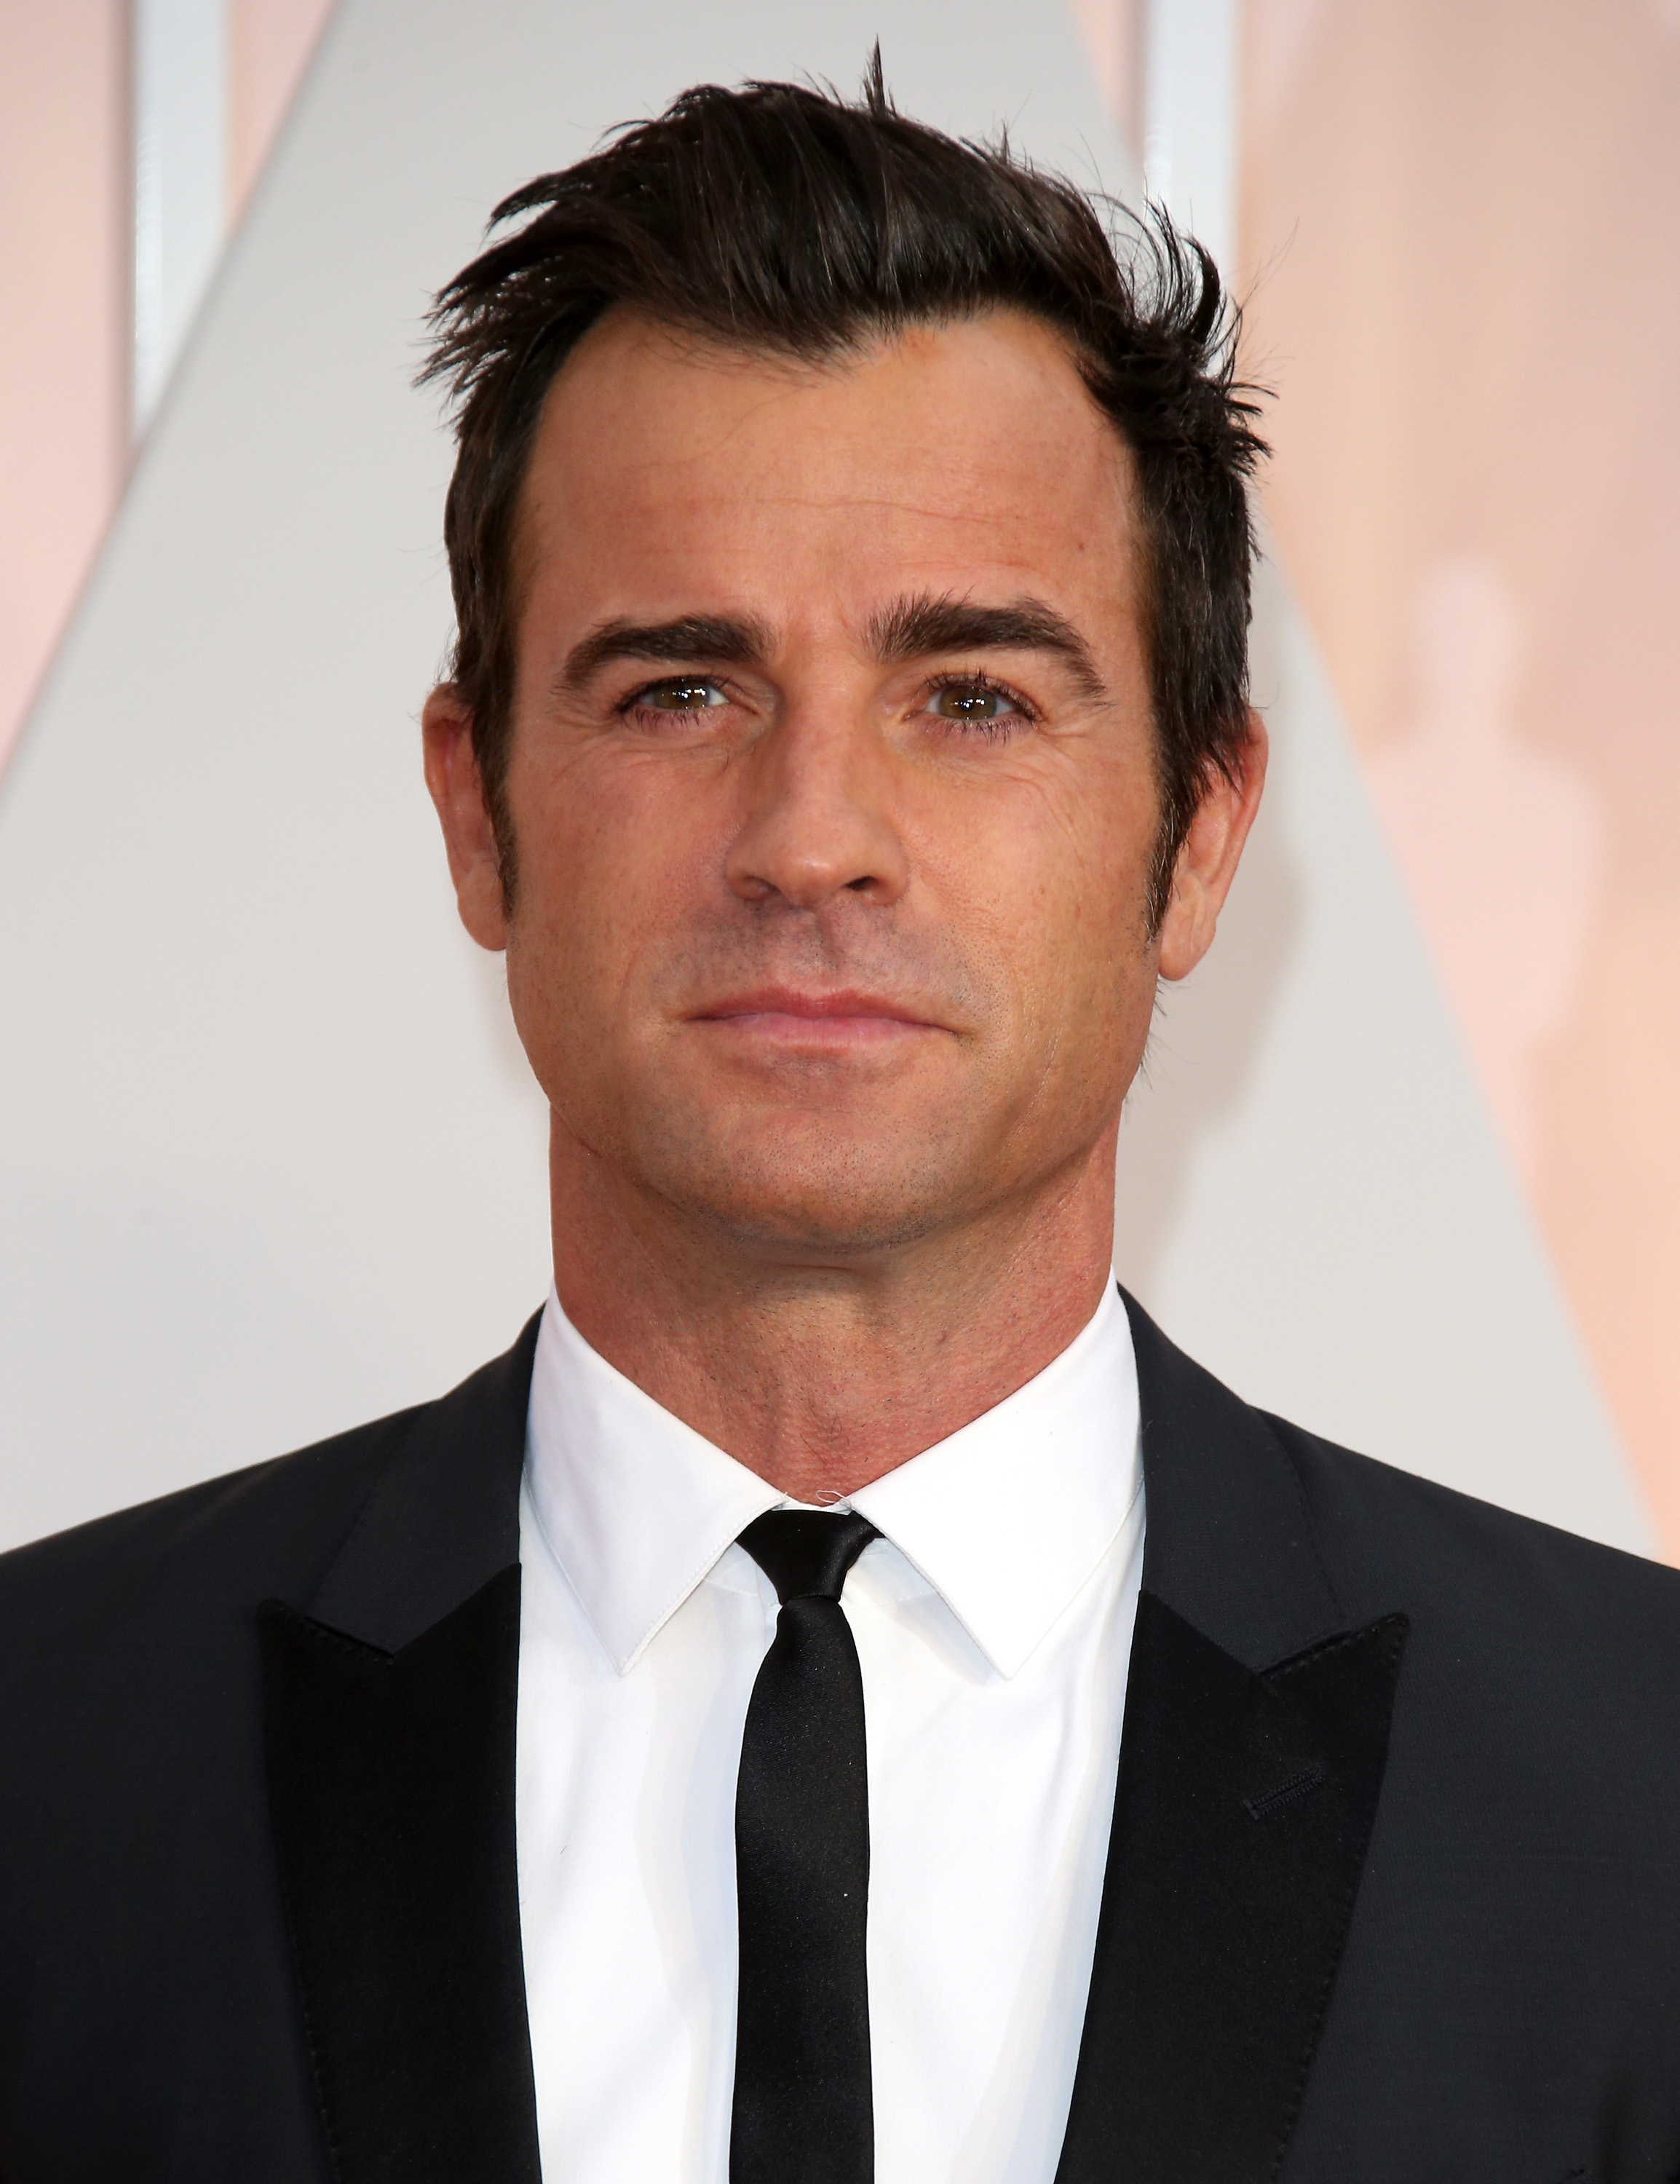 Justin Theroux at the 87th Annual Academy Awards in Los Angeles. (Dan MacMedan—Getty Images)